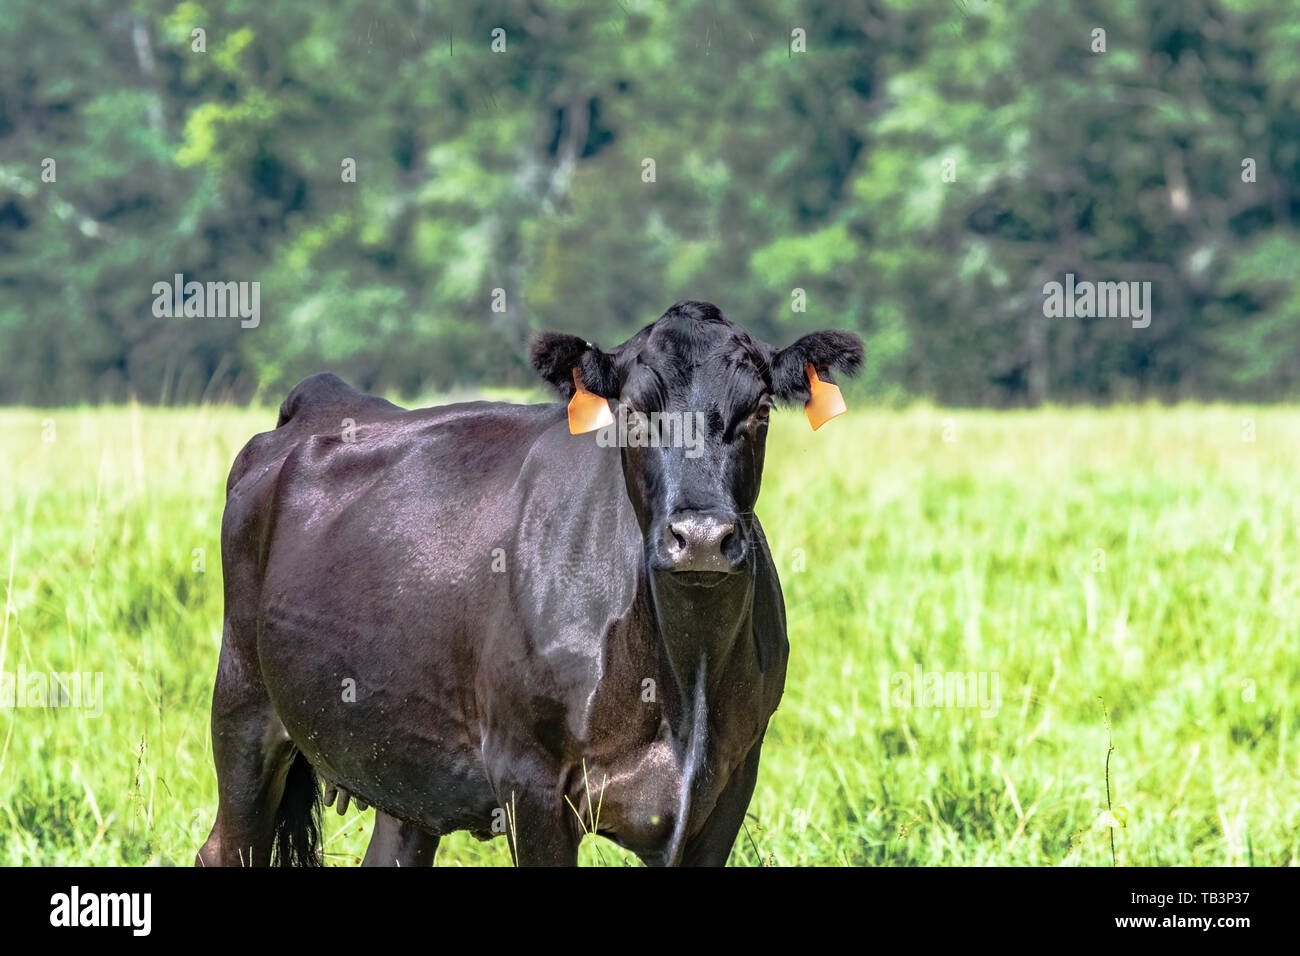 Black Angus beef cow with summer hair coat from the chest up with pasture and treeline in the background Stock Photo